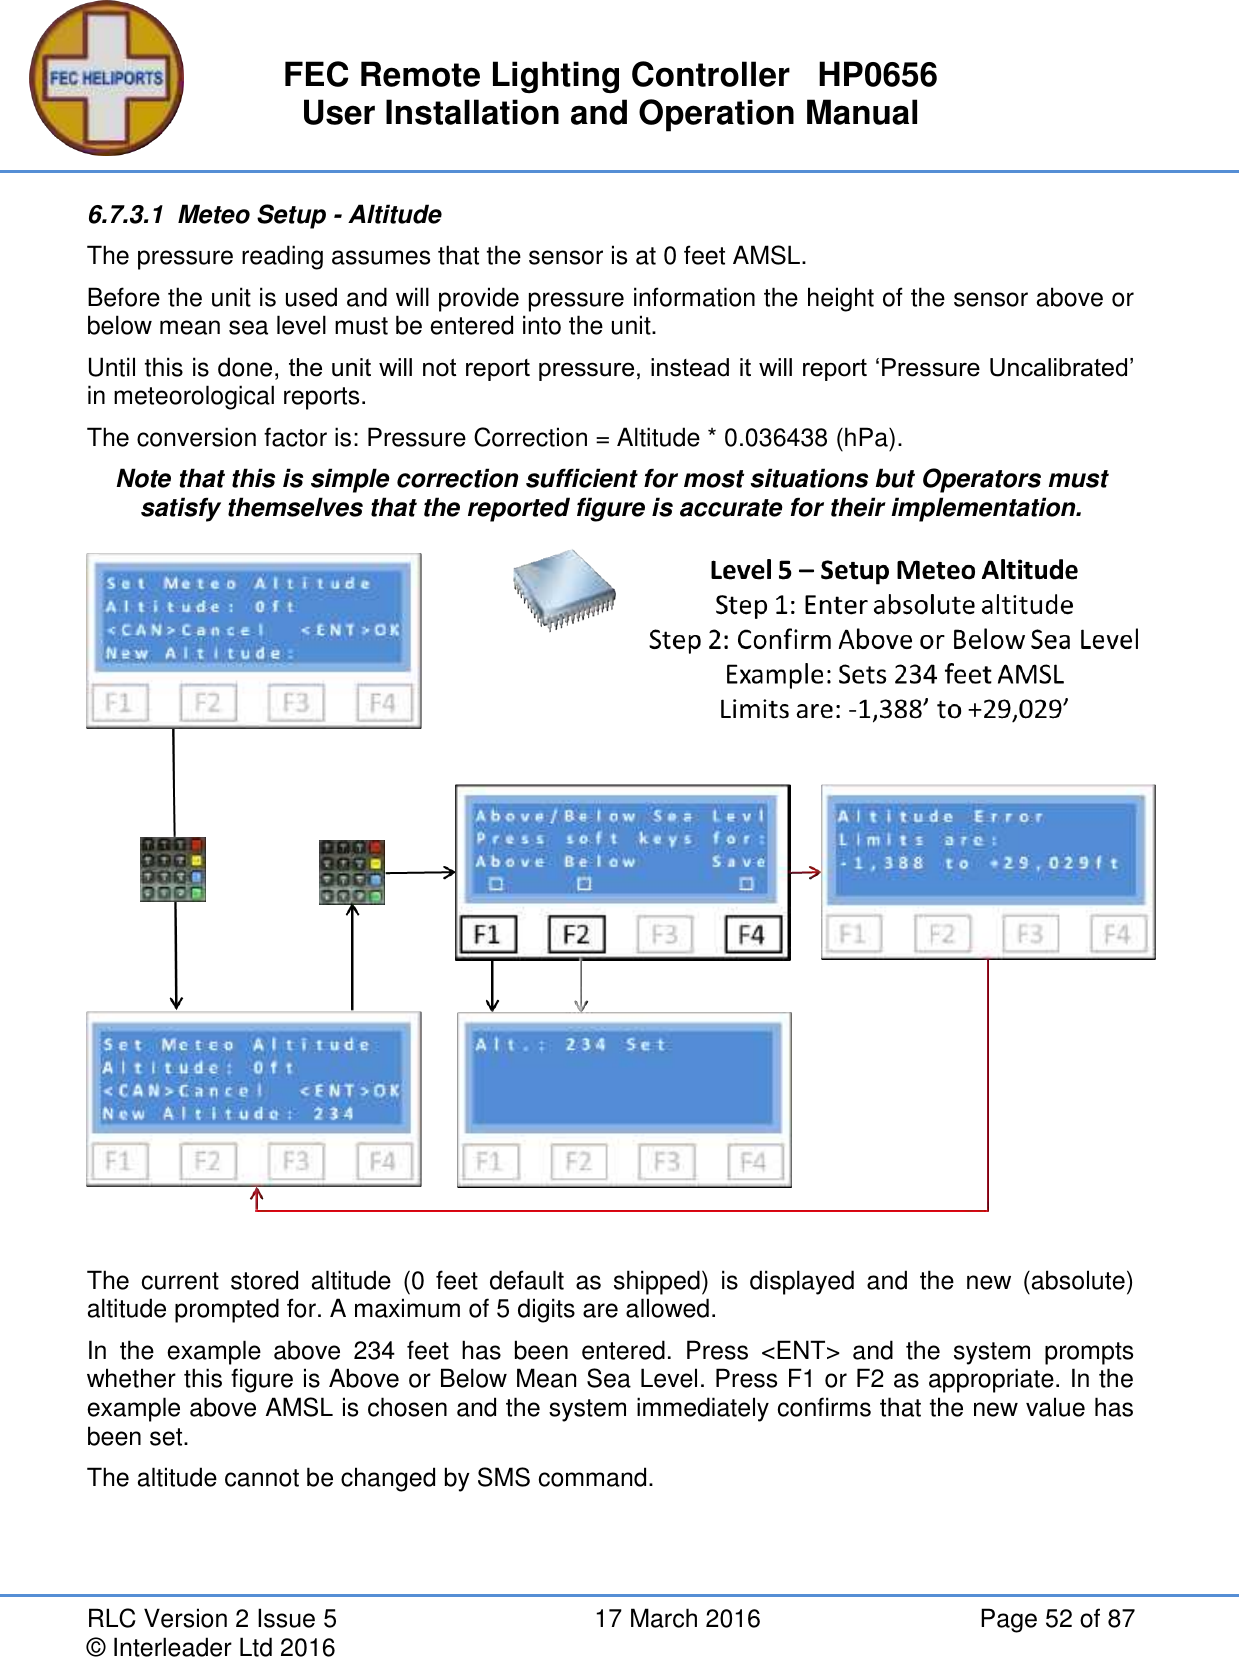 FEC Remote Lighting Controller   HP0656 User Installation and Operation Manual RLC Version 2 Issue 5  17 March 2016  Page 52 of 87 © Interleader Ltd 2016 6.7.3.1  Meteo Setup - Altitude The pressure reading assumes that the sensor is at 0 feet AMSL. Before the unit is used and will provide pressure information the height of the sensor above or below mean sea level must be entered into the unit. Until this is done, the unit will not report pressure, instead it will report ‘Pressure Uncalibrated’ in meteorological reports. The conversion factor is: Pressure Correction = Altitude * 0.036438 (hPa). Note that this is simple correction sufficient for most situations but Operators must satisfy themselves that the reported figure is accurate for their implementation.   The  current  stored  altitude  (0 feet  default  as  shipped)  is  displayed  and  the  new  (absolute) altitude prompted for. A maximum of 5 digits are allowed. In  the  example  above  234  feet  has  been  entered.  Press  &lt;ENT&gt;  and  the  system  prompts whether this figure is Above or Below Mean Sea Level. Press F1 or F2 as appropriate. In the example above AMSL is chosen and the system immediately confirms that the new value has been set. The altitude cannot be changed by SMS command.    